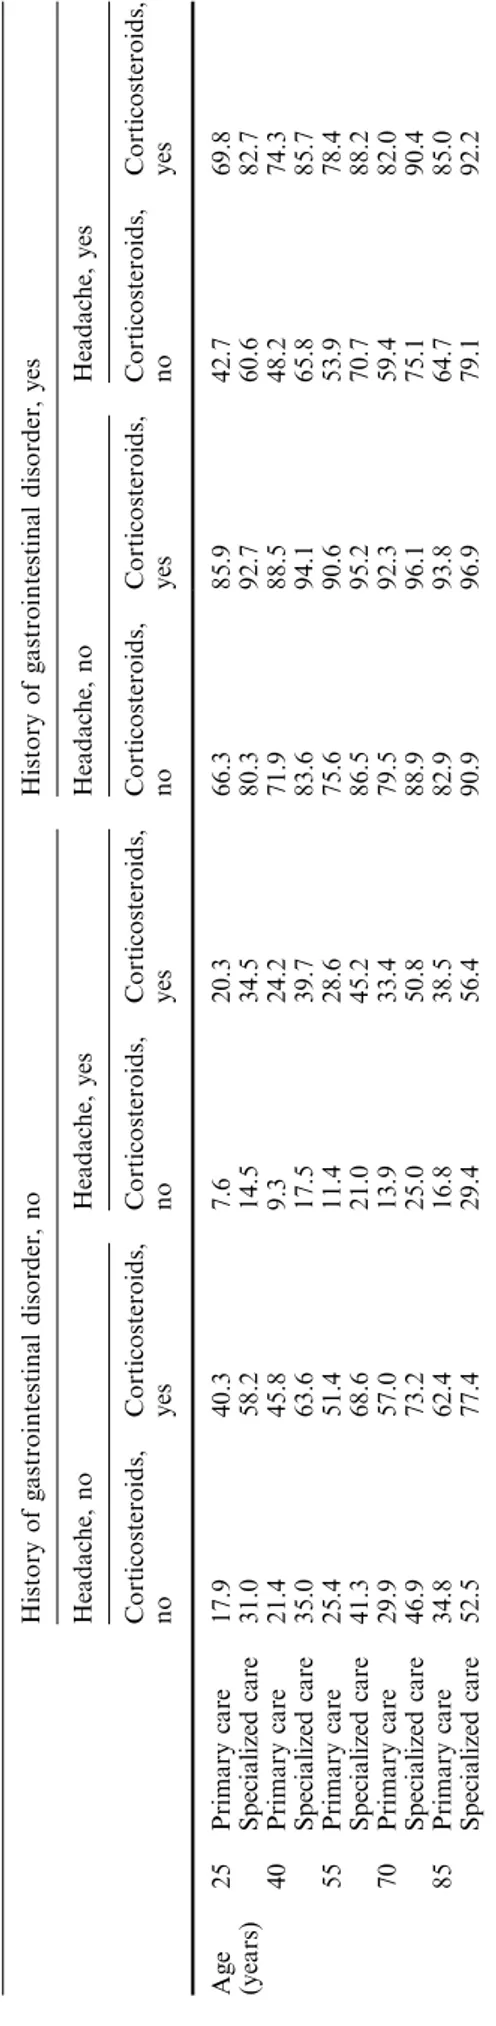 Table 4 Use of gastroprotection by non-steroidal anti-inﬂamma- anti-inﬂamma-tory drug (NSAID) type